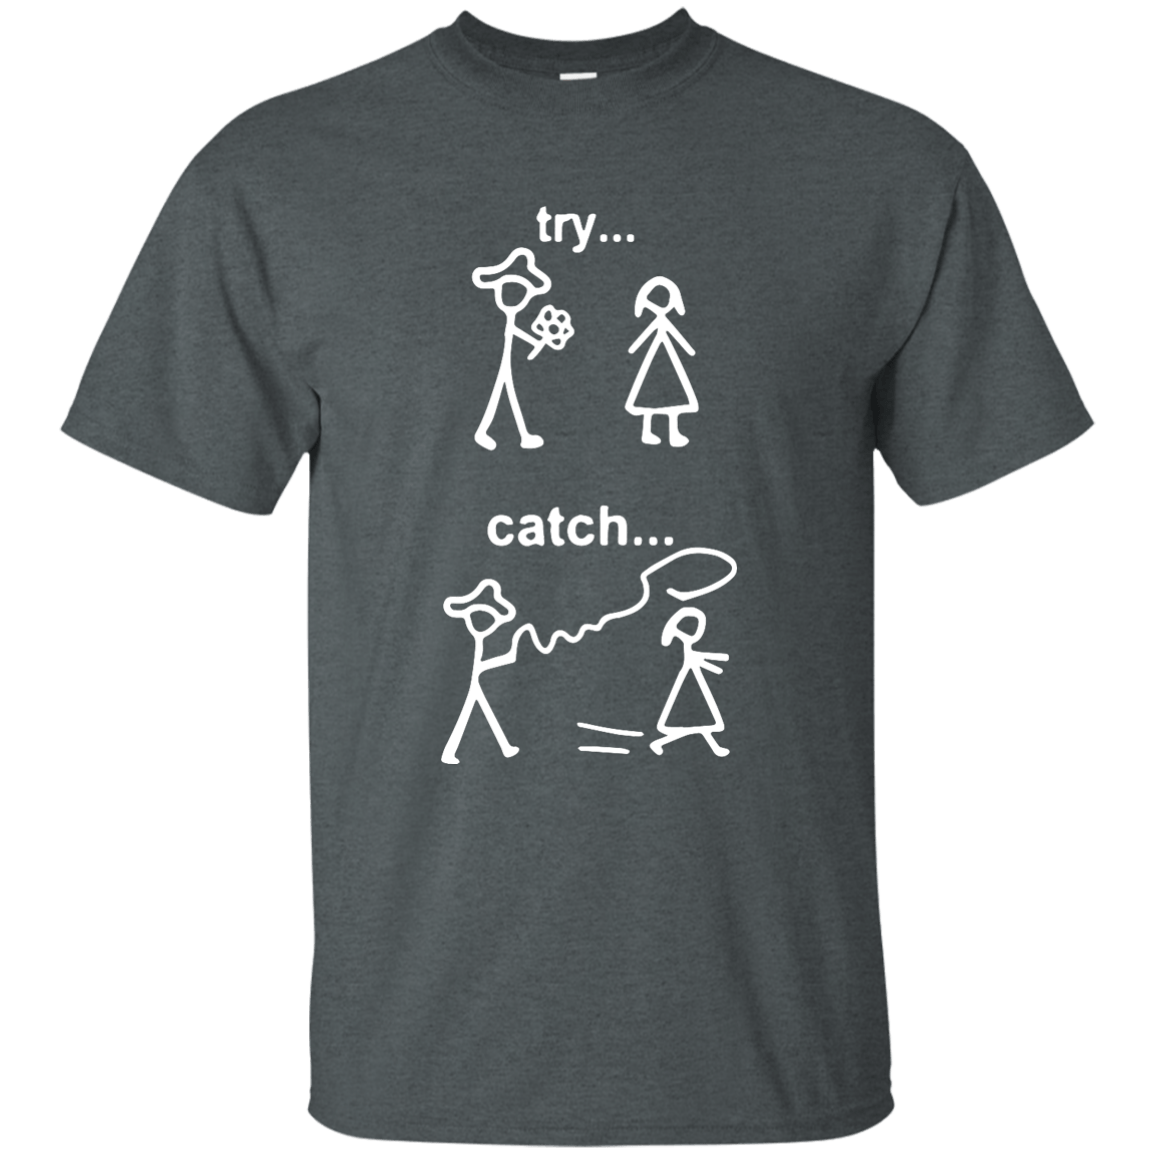 No. 1 try in Tee++ | Programming T-Shirts – catch